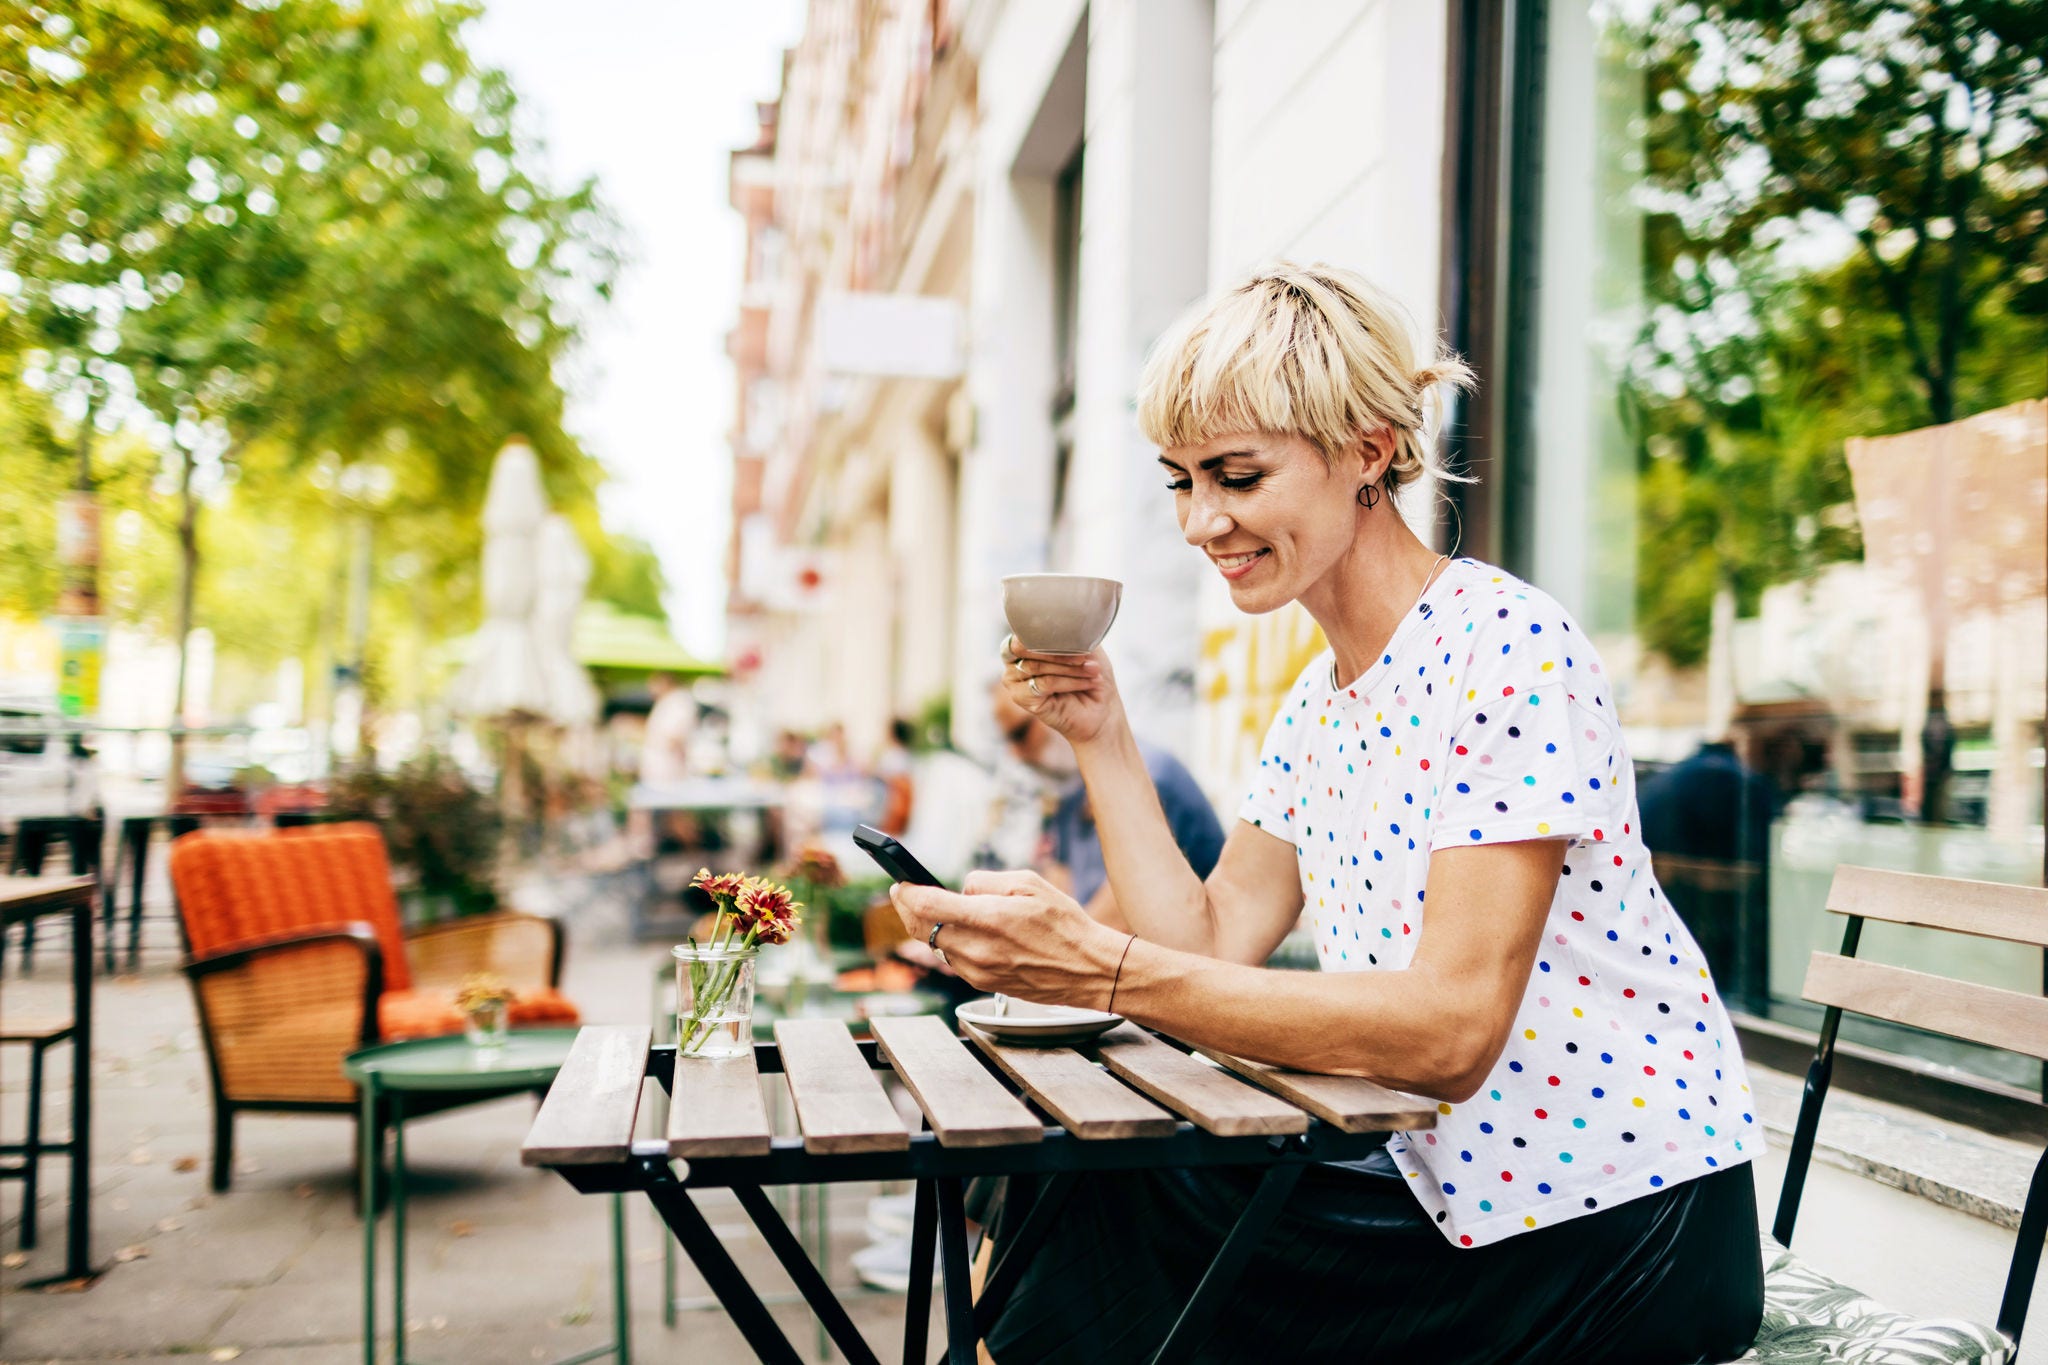 A woman sitting at a table outside a cafe looking at her smartphone while drinking a cup of coffee.